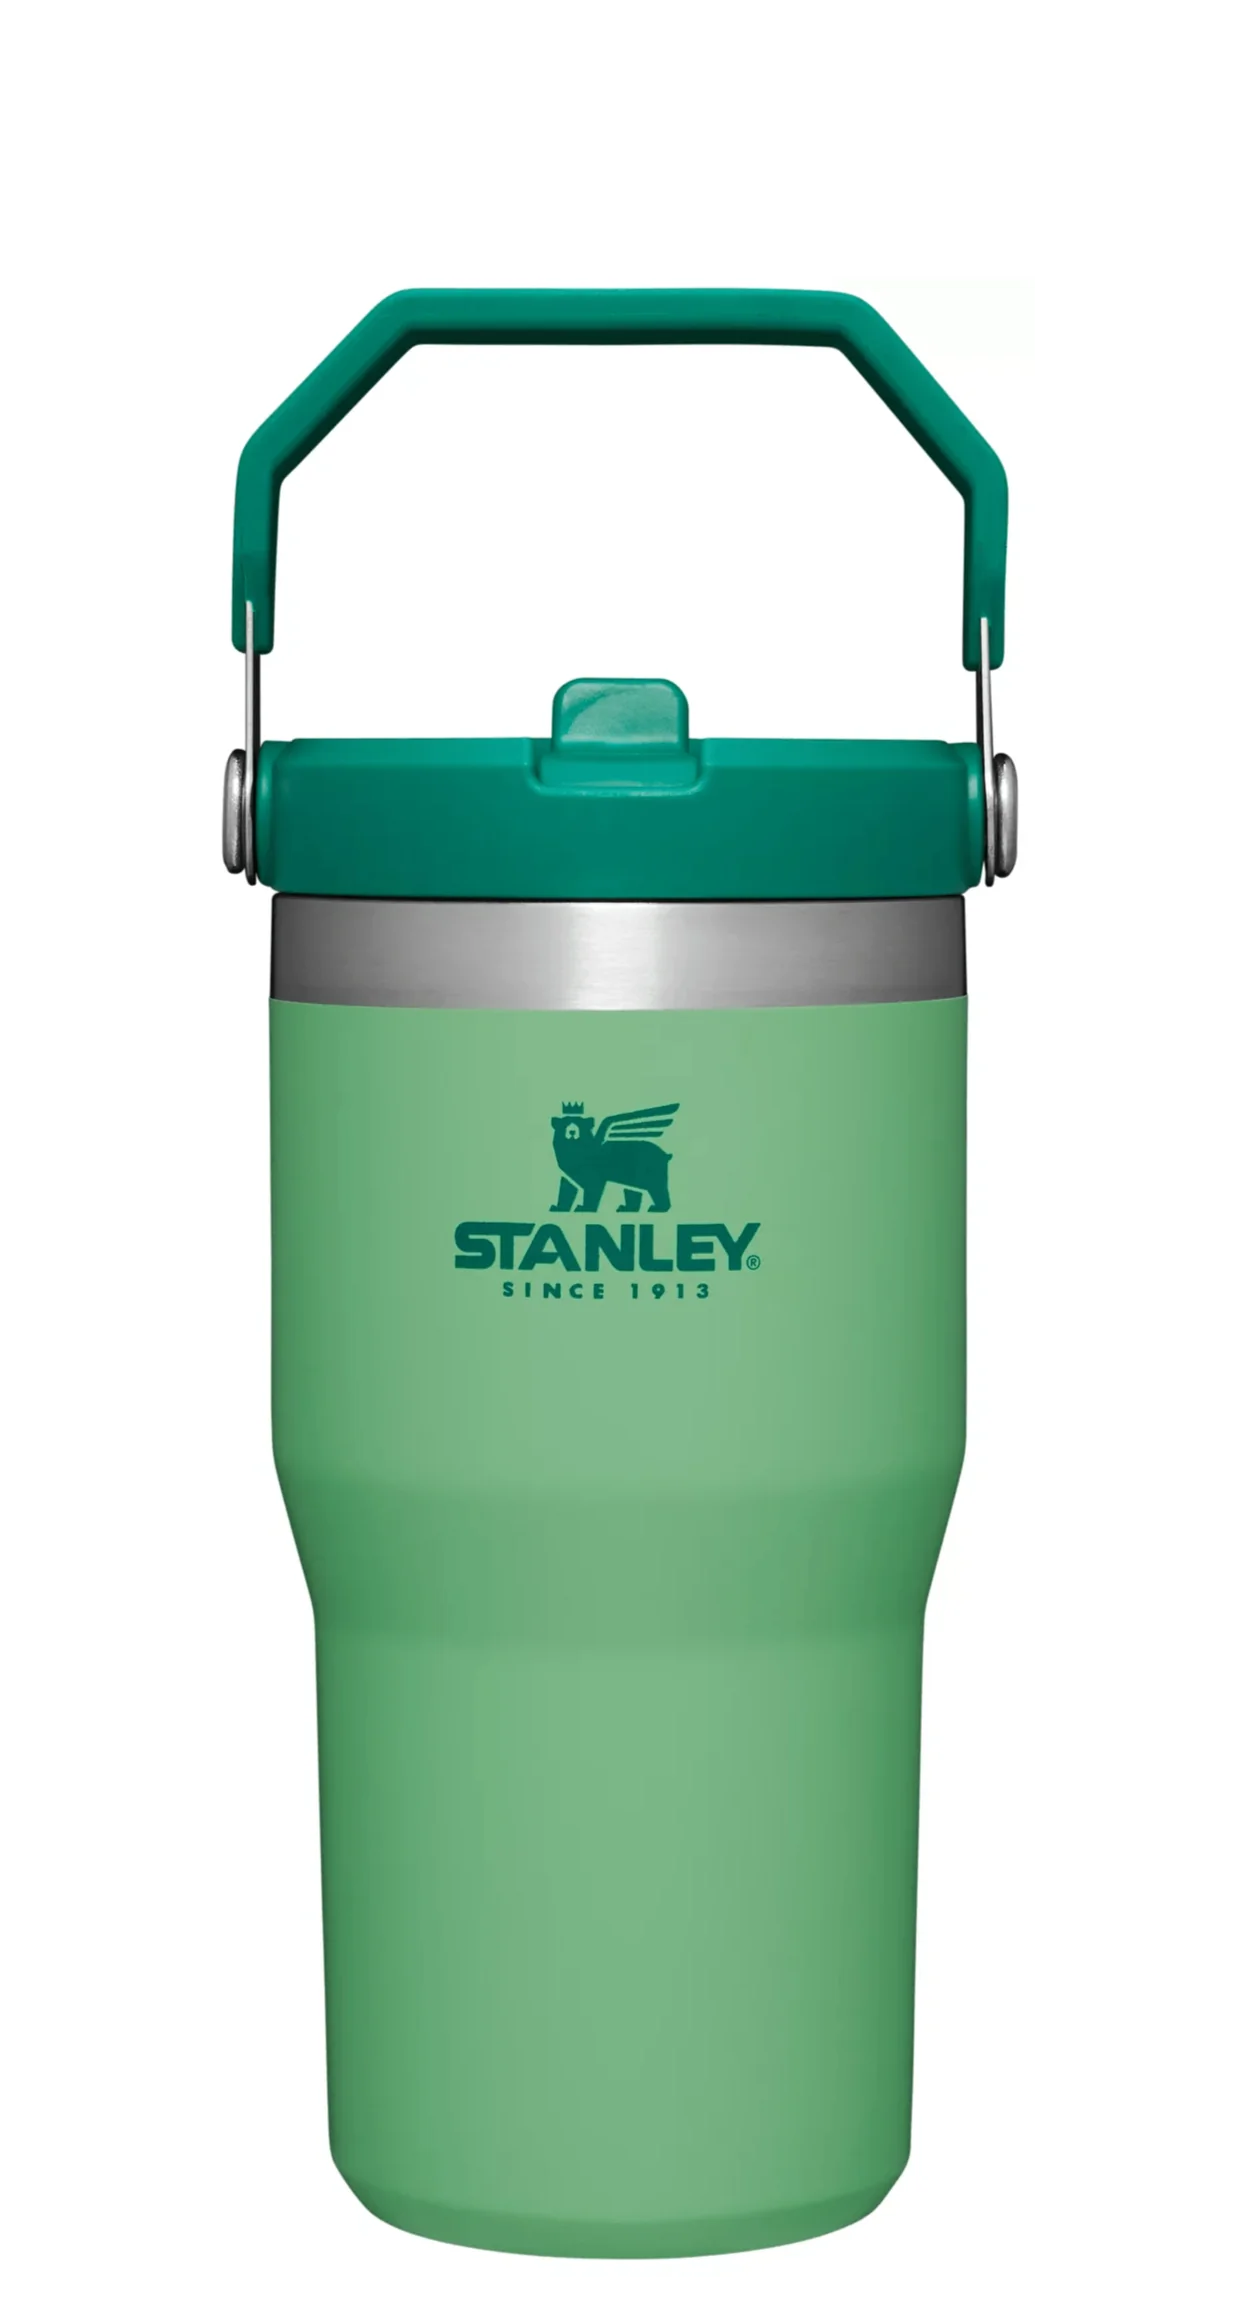 Flip, Clip, Sip: Stanley Launches 'IceFlow' Gear With Flip Straws